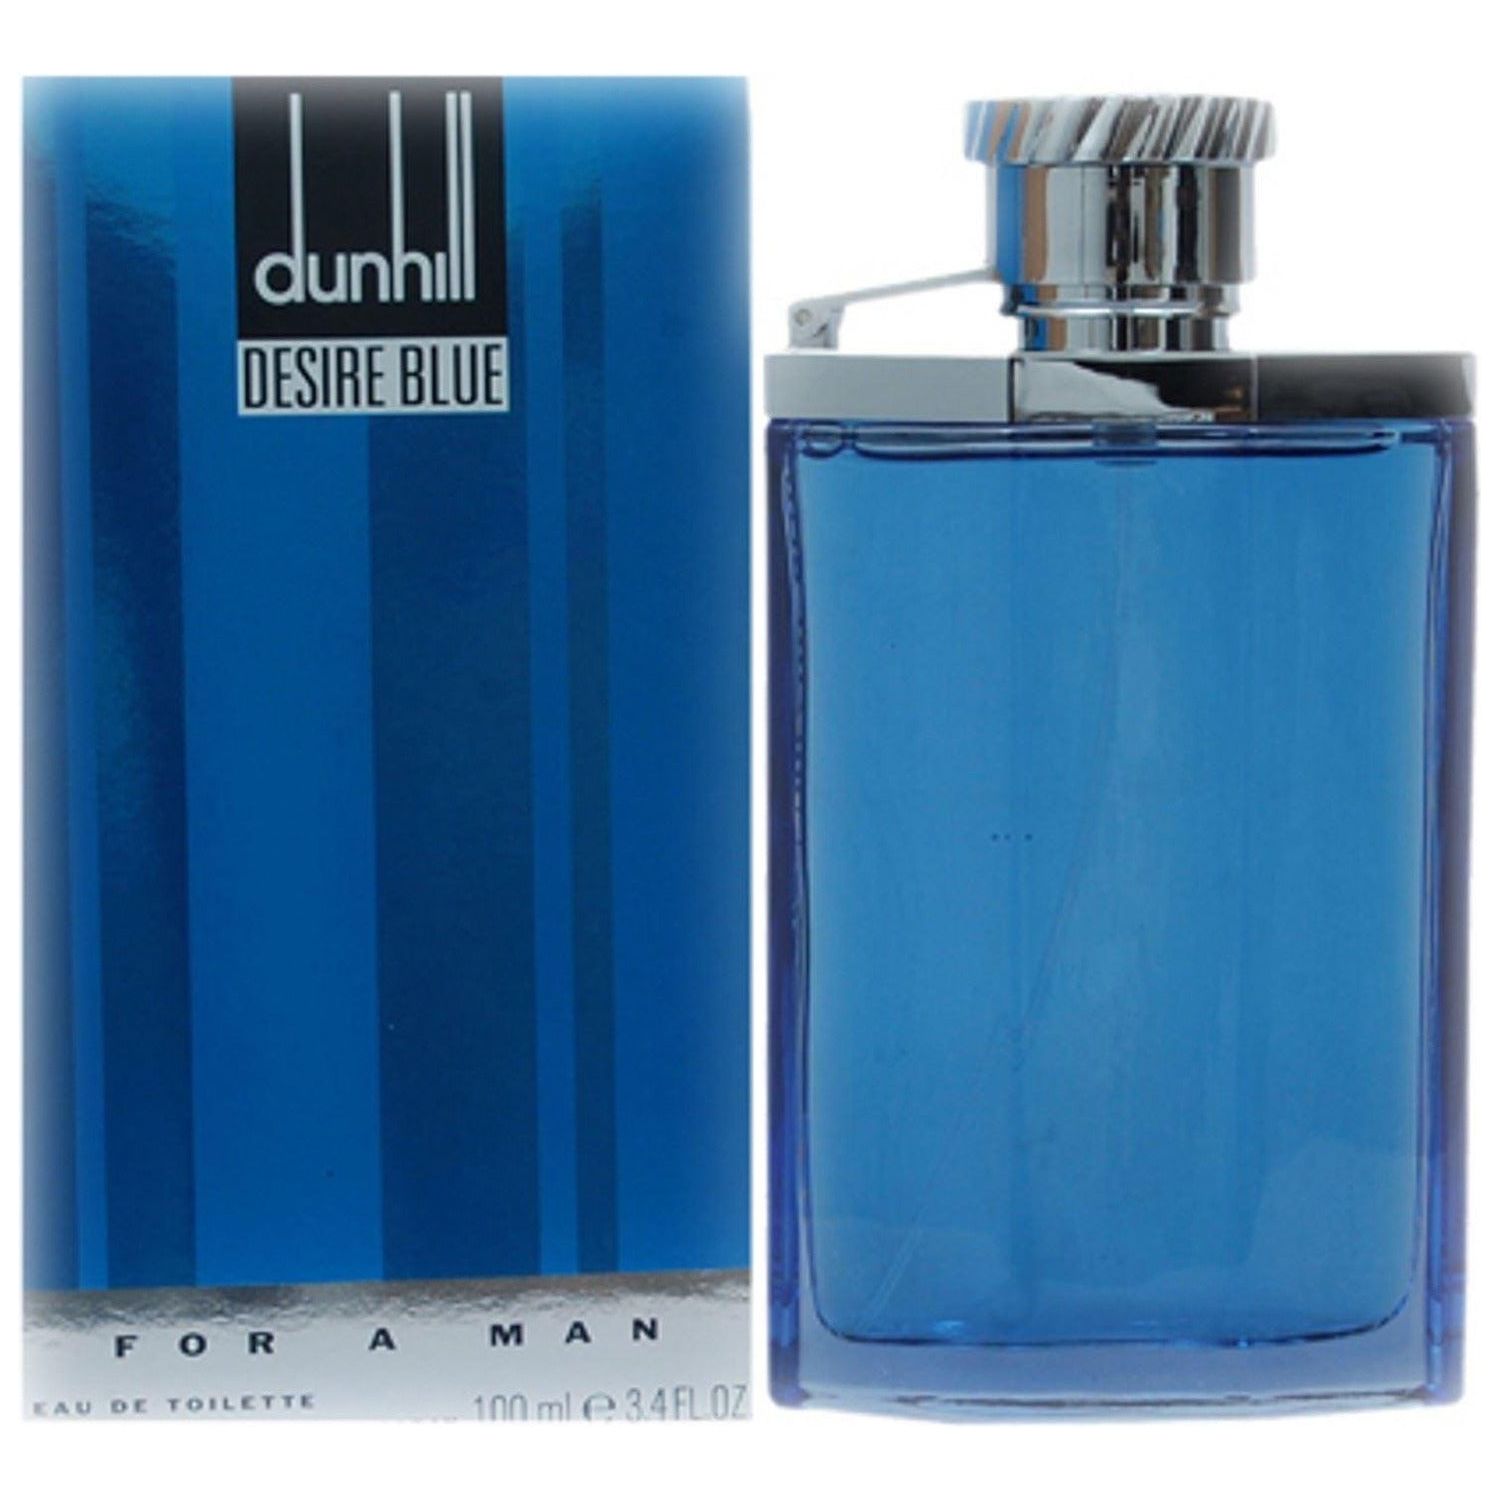 Desire Blue by Dunhill Cologne